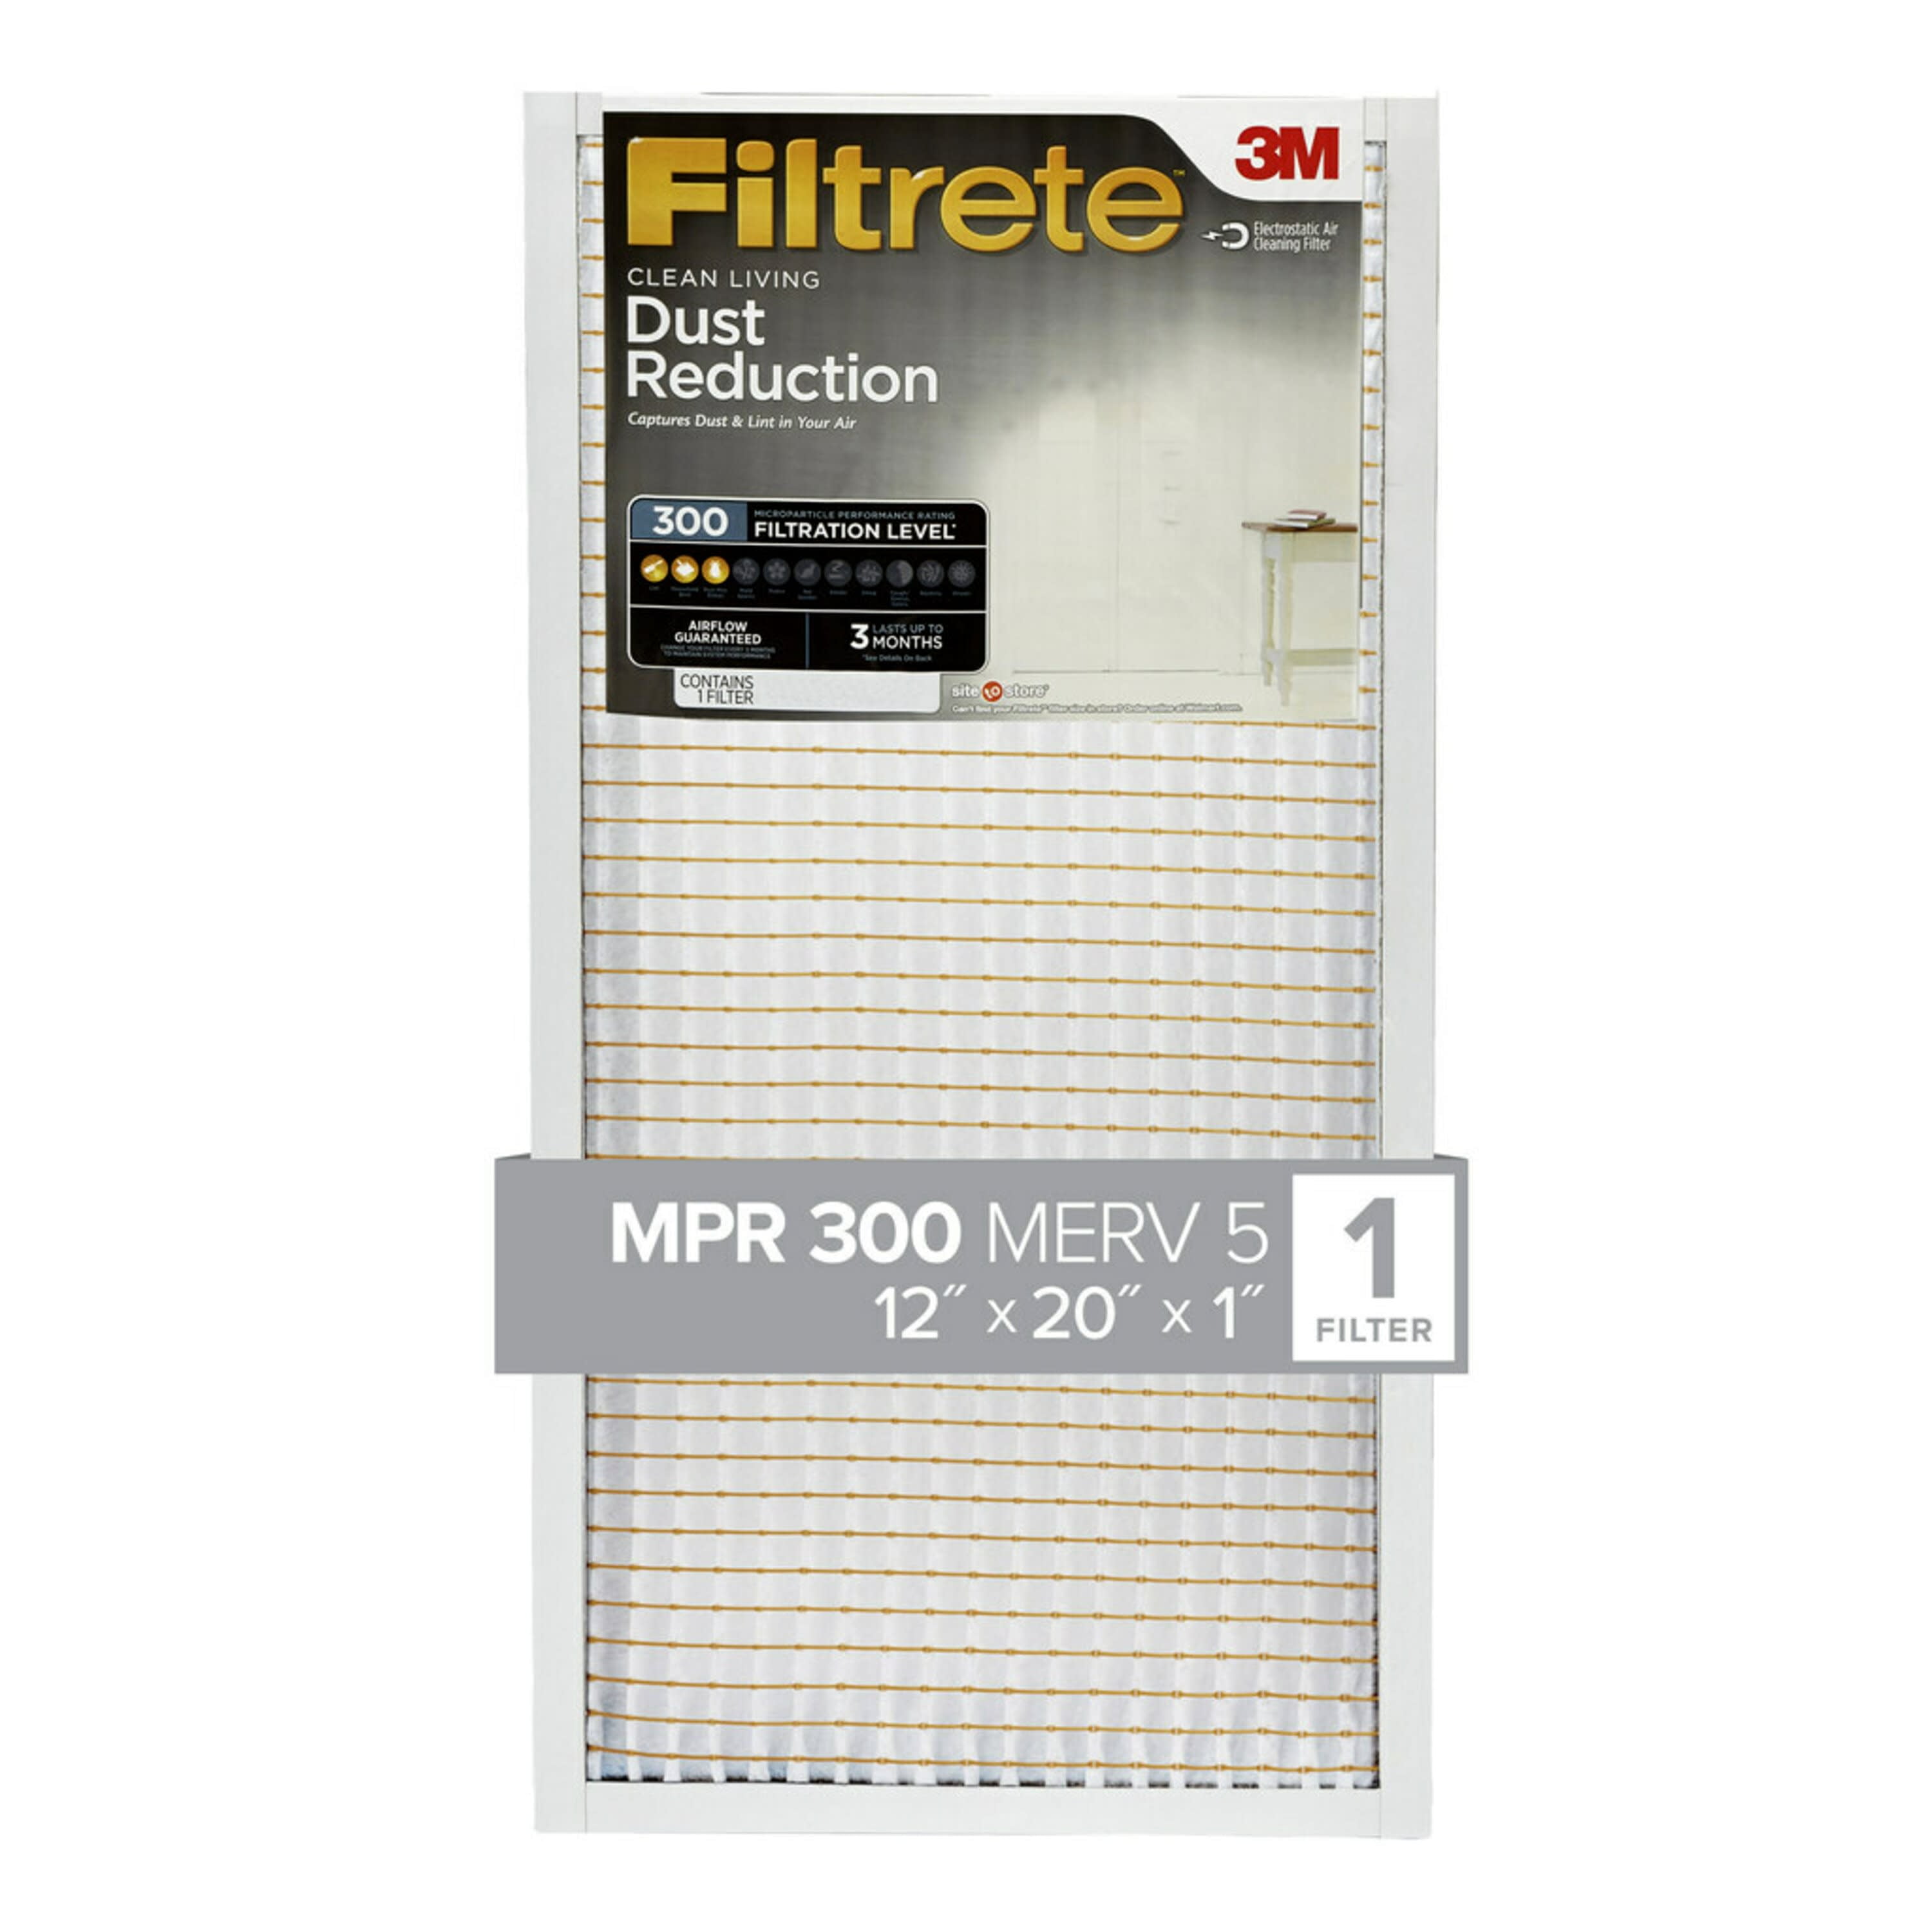 Filtrete by 3M, 12x20x1, MERV 5, Dust Reduction HVAC Furnace Air Filter, Captures Dust and Lint, 300 MPR, 1 Filter